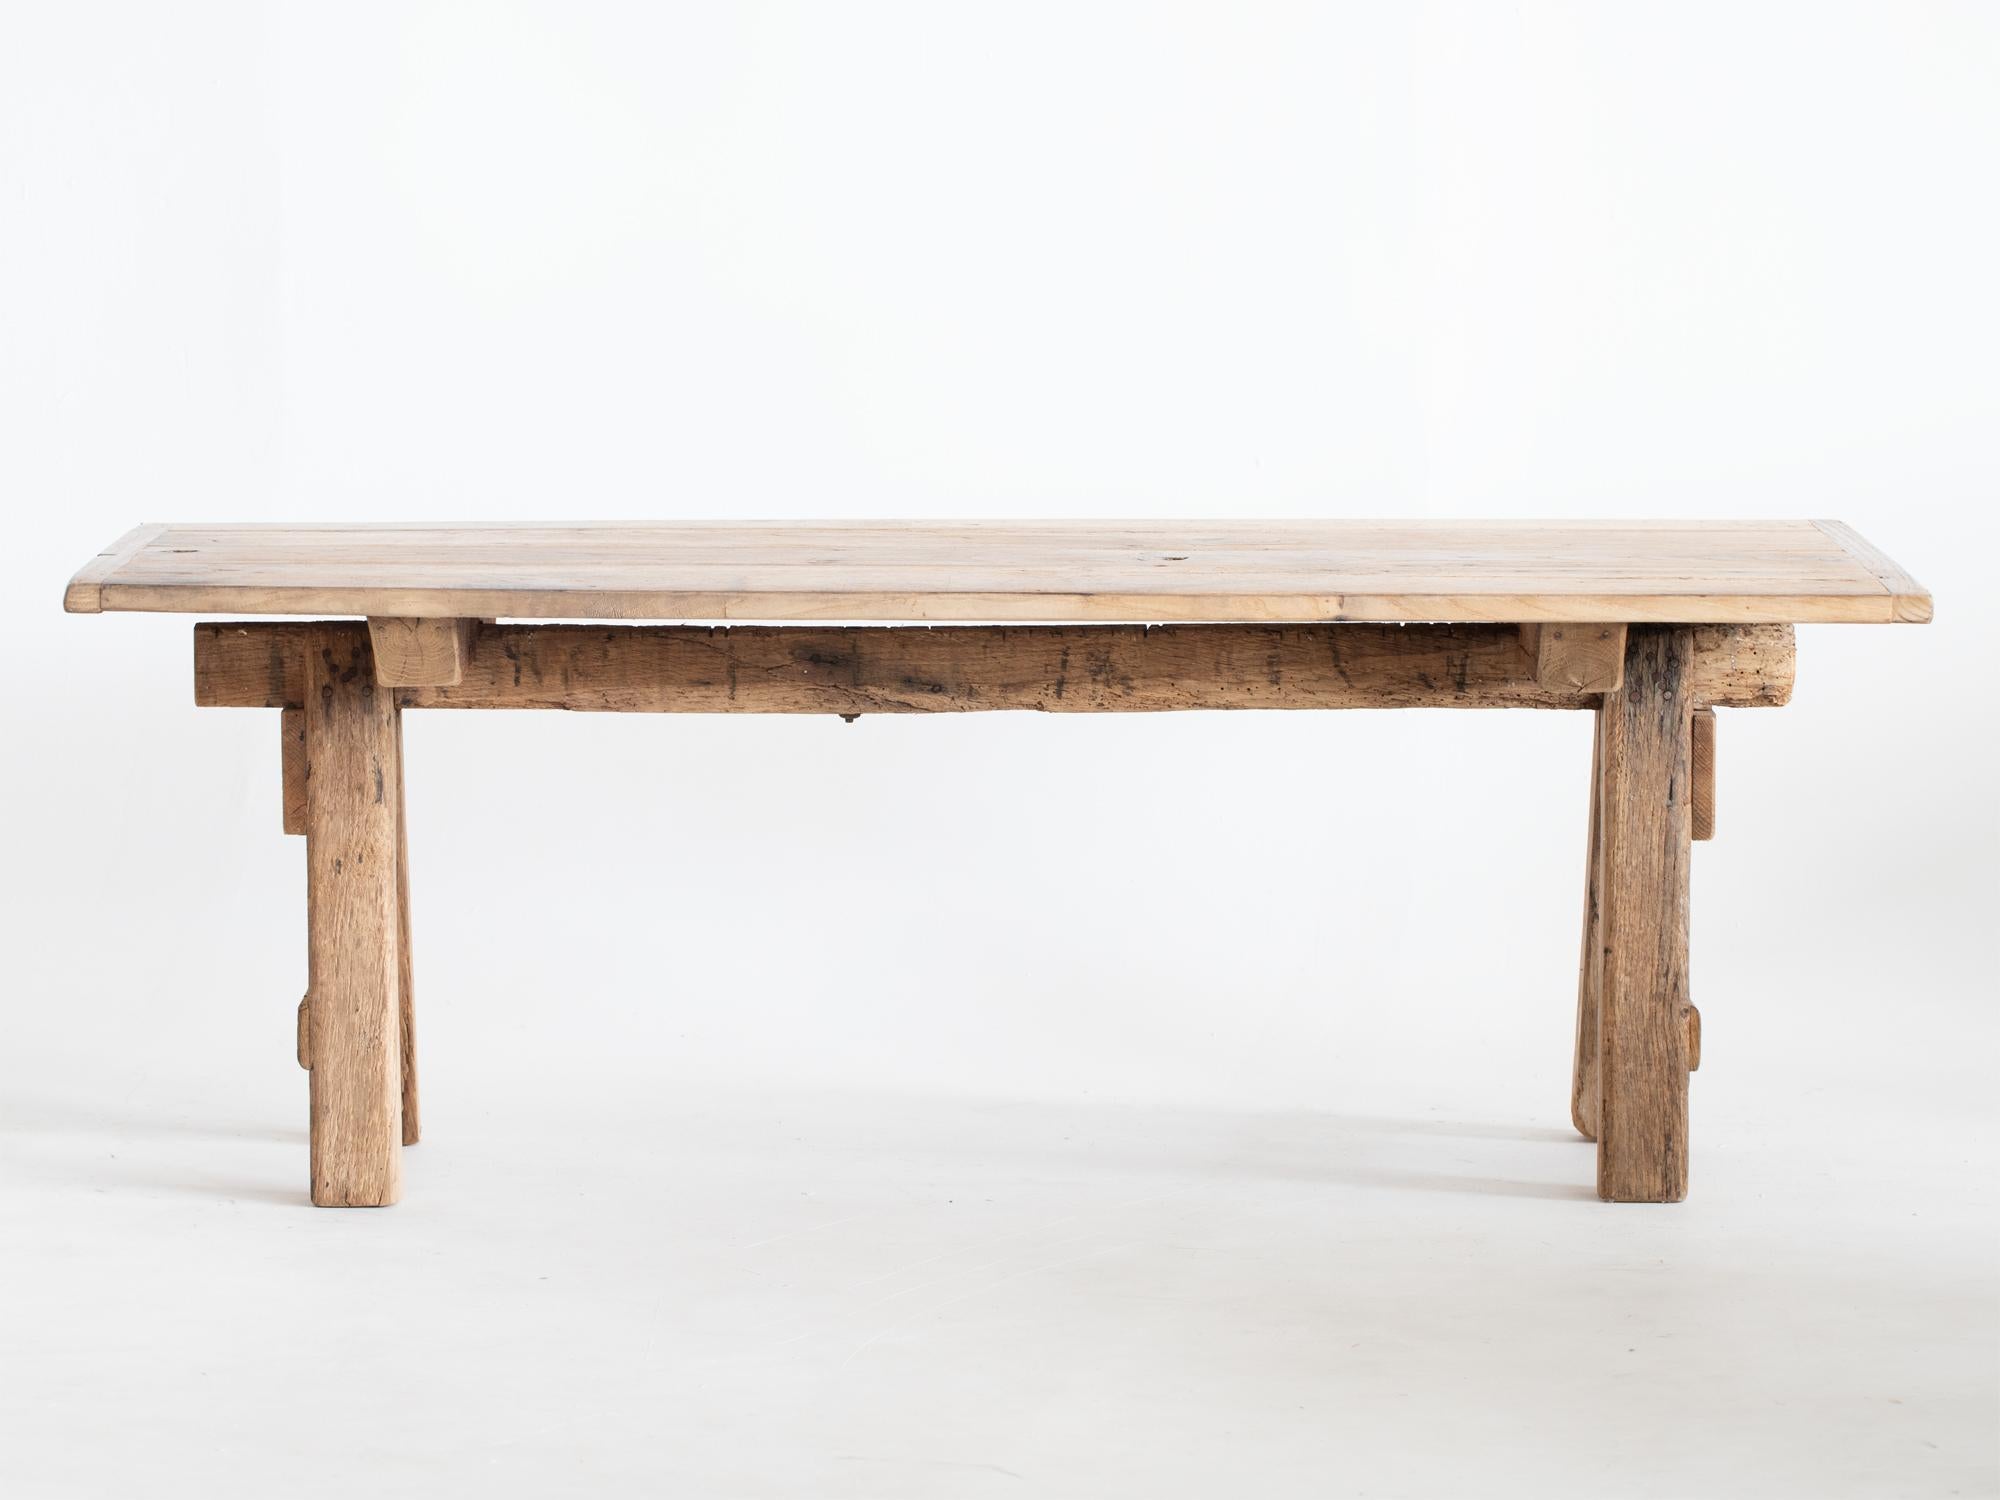 A chestnut trestle coffee table. Recently crafted in Normandy, France, using reclaimed antique French elements.

Stock ref. #2199

In good sturdy order with a light natural finish.

56.5 x 160.5 x 65.5 cm

22.2 x 63.2 x 25.8 